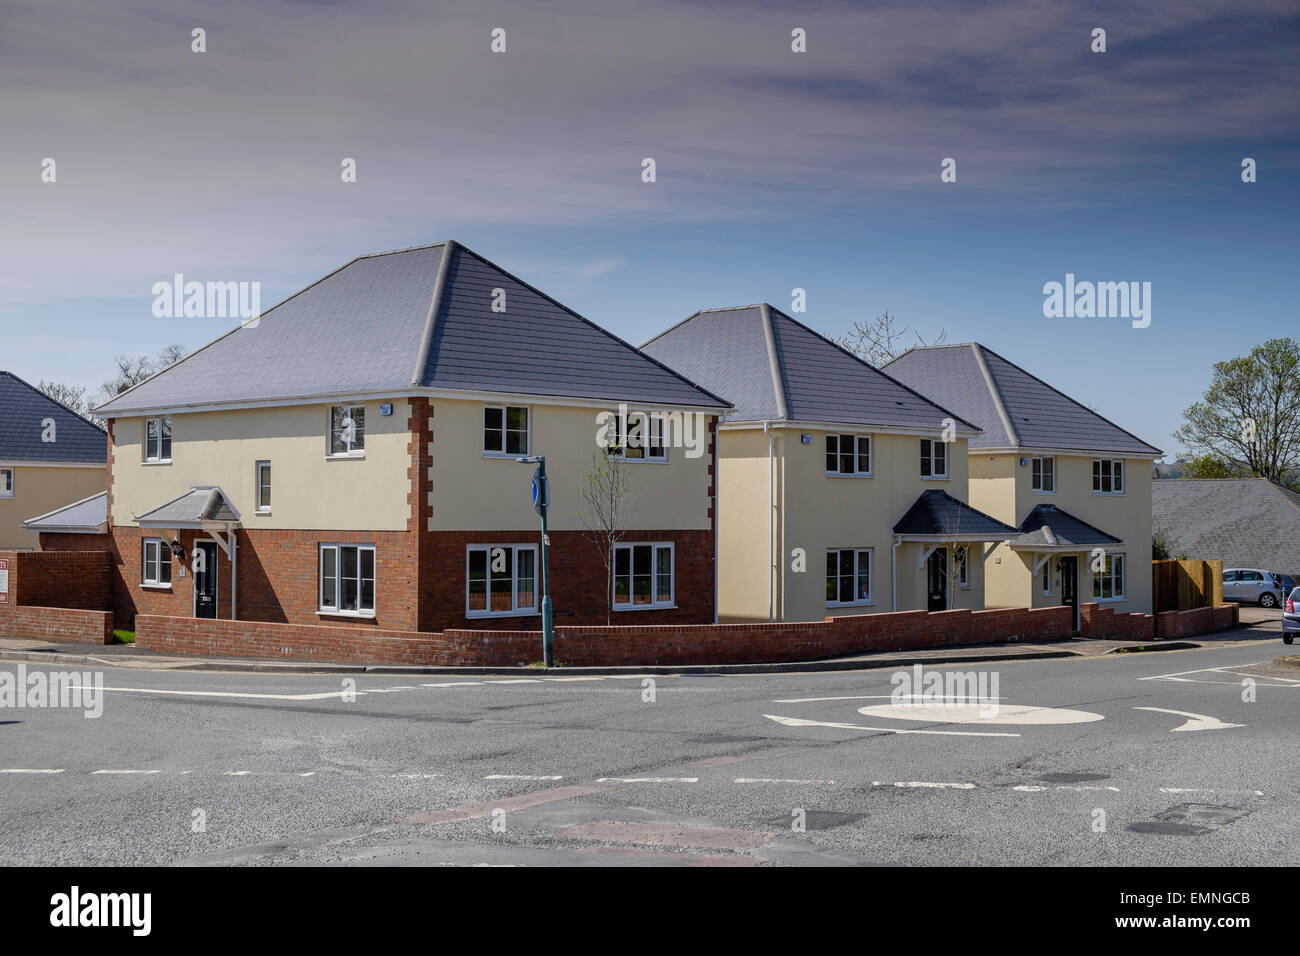 NEW BUILD HOUSES AT ROAD JUNCTION IN TUTSHILL GLOUCESTERSHIRE UK Stock Photo